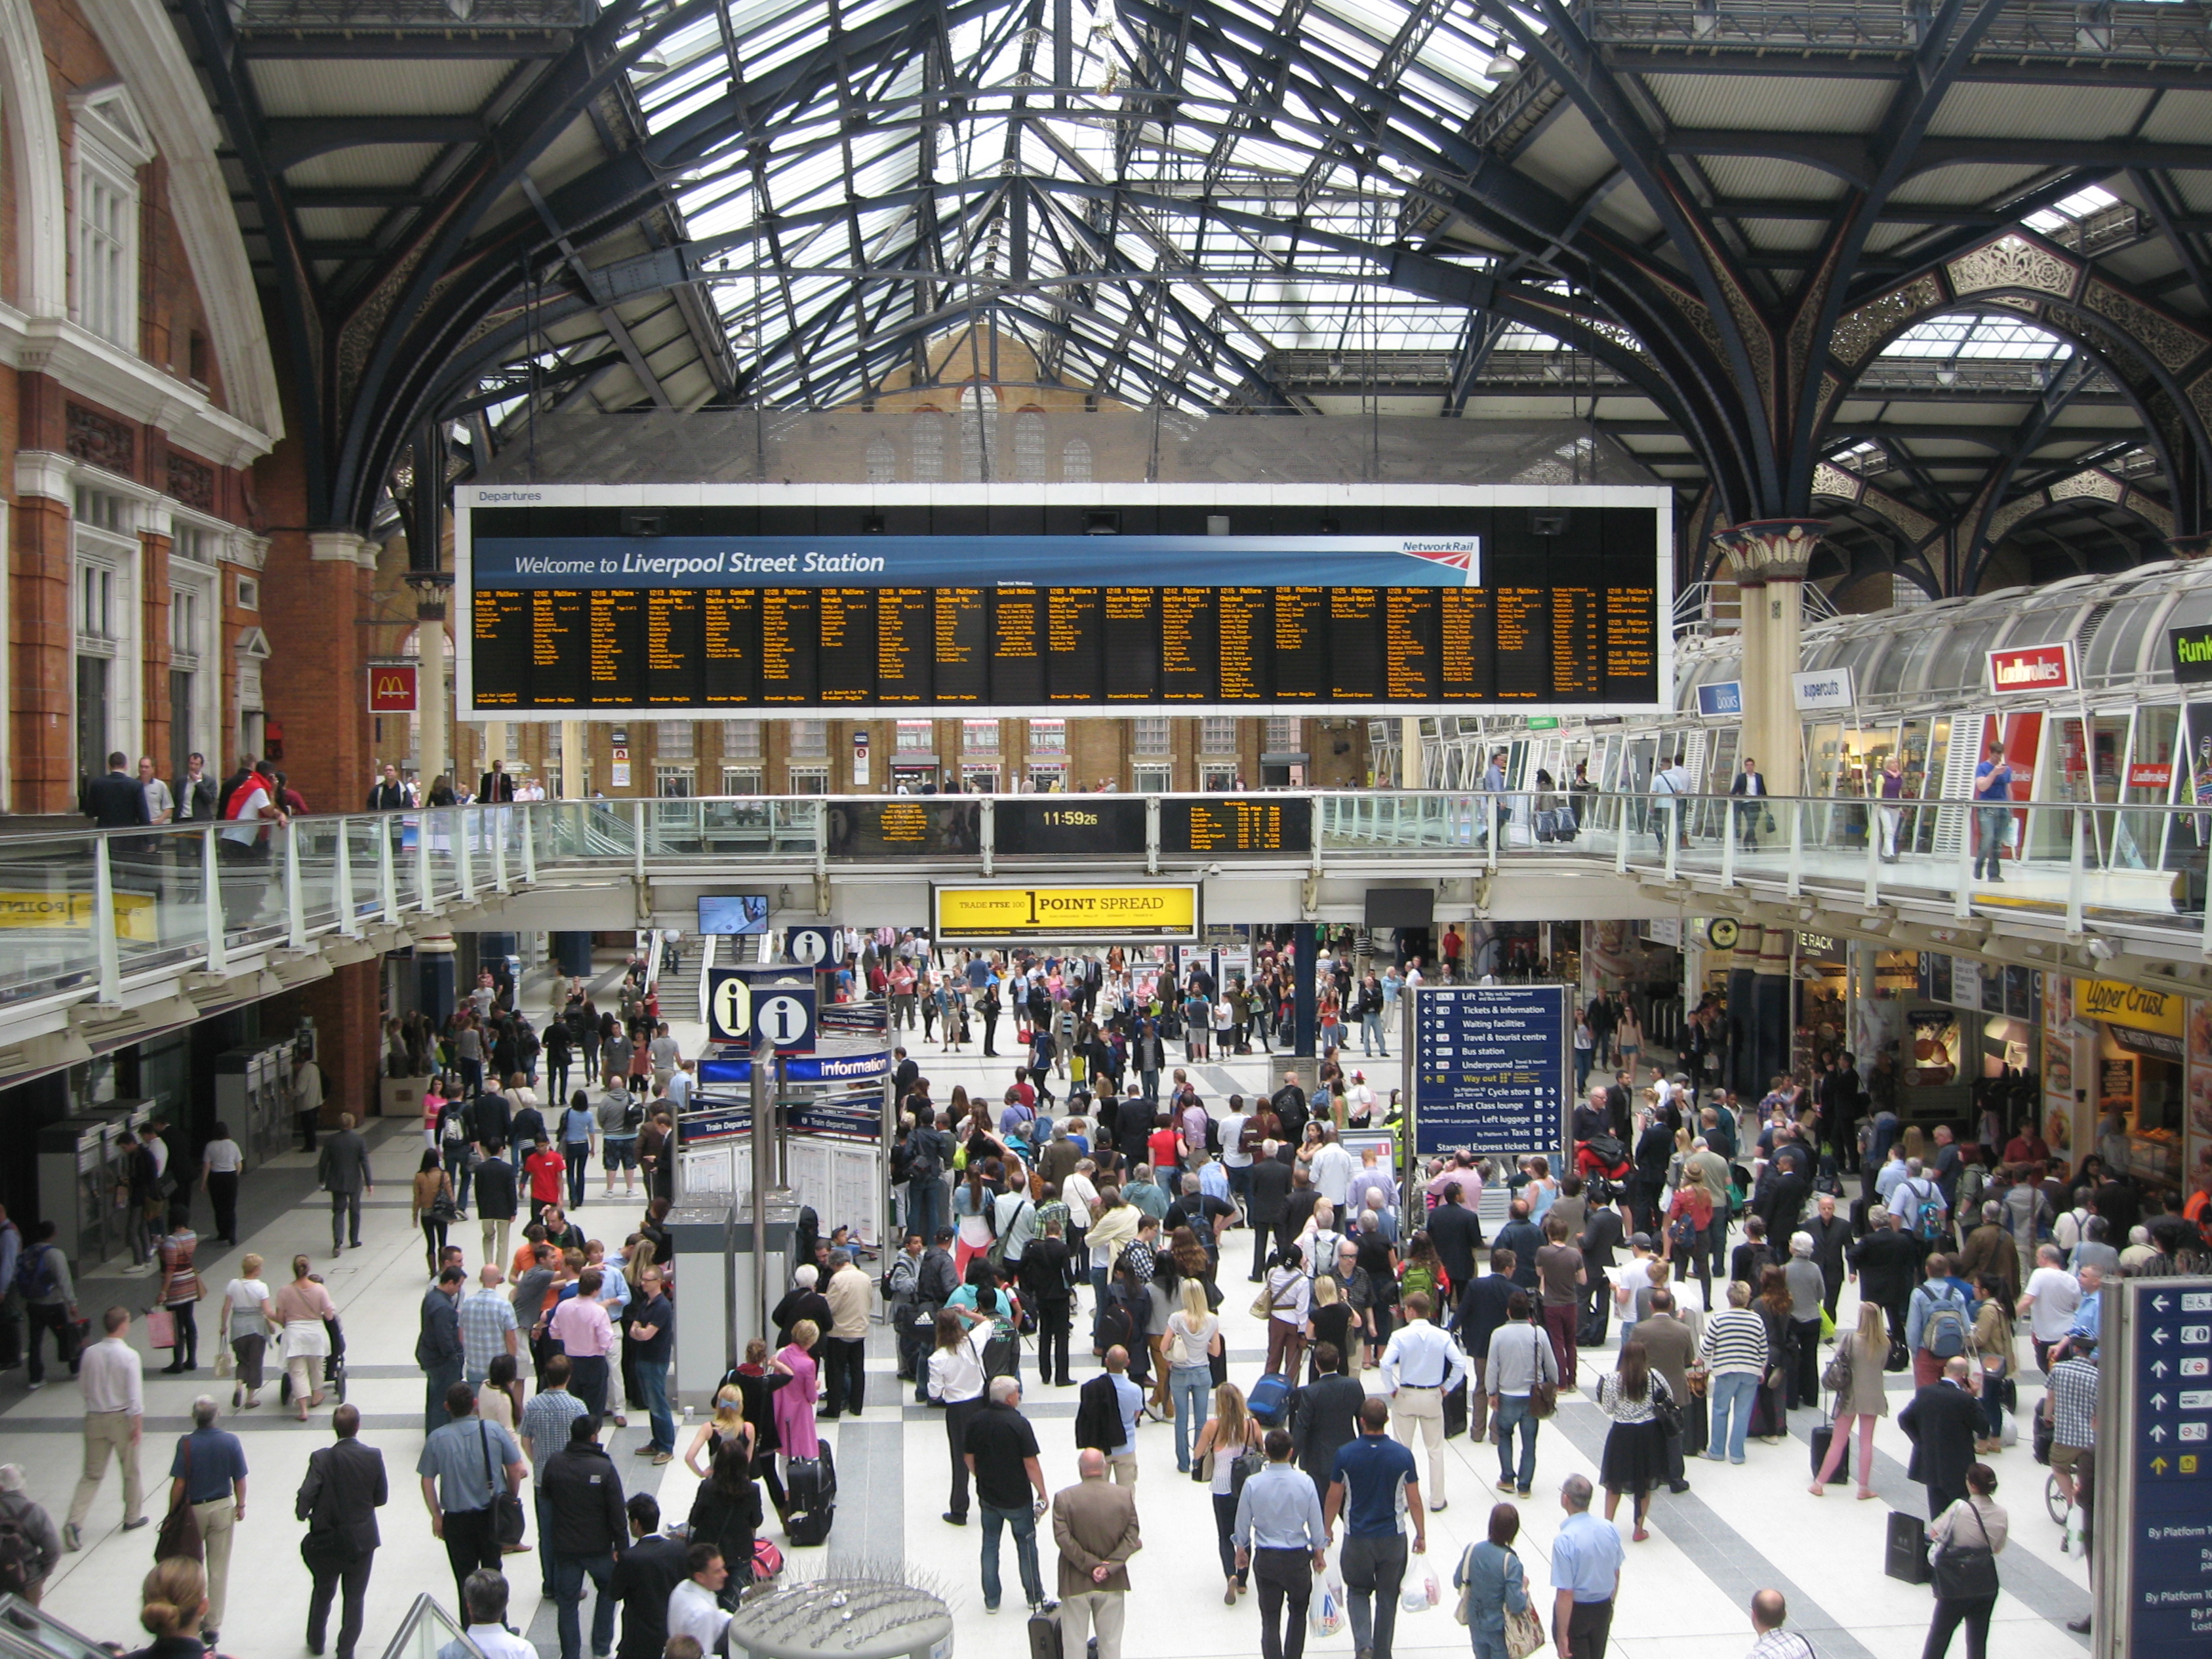 Liverpool Street Station, London. Photo by me